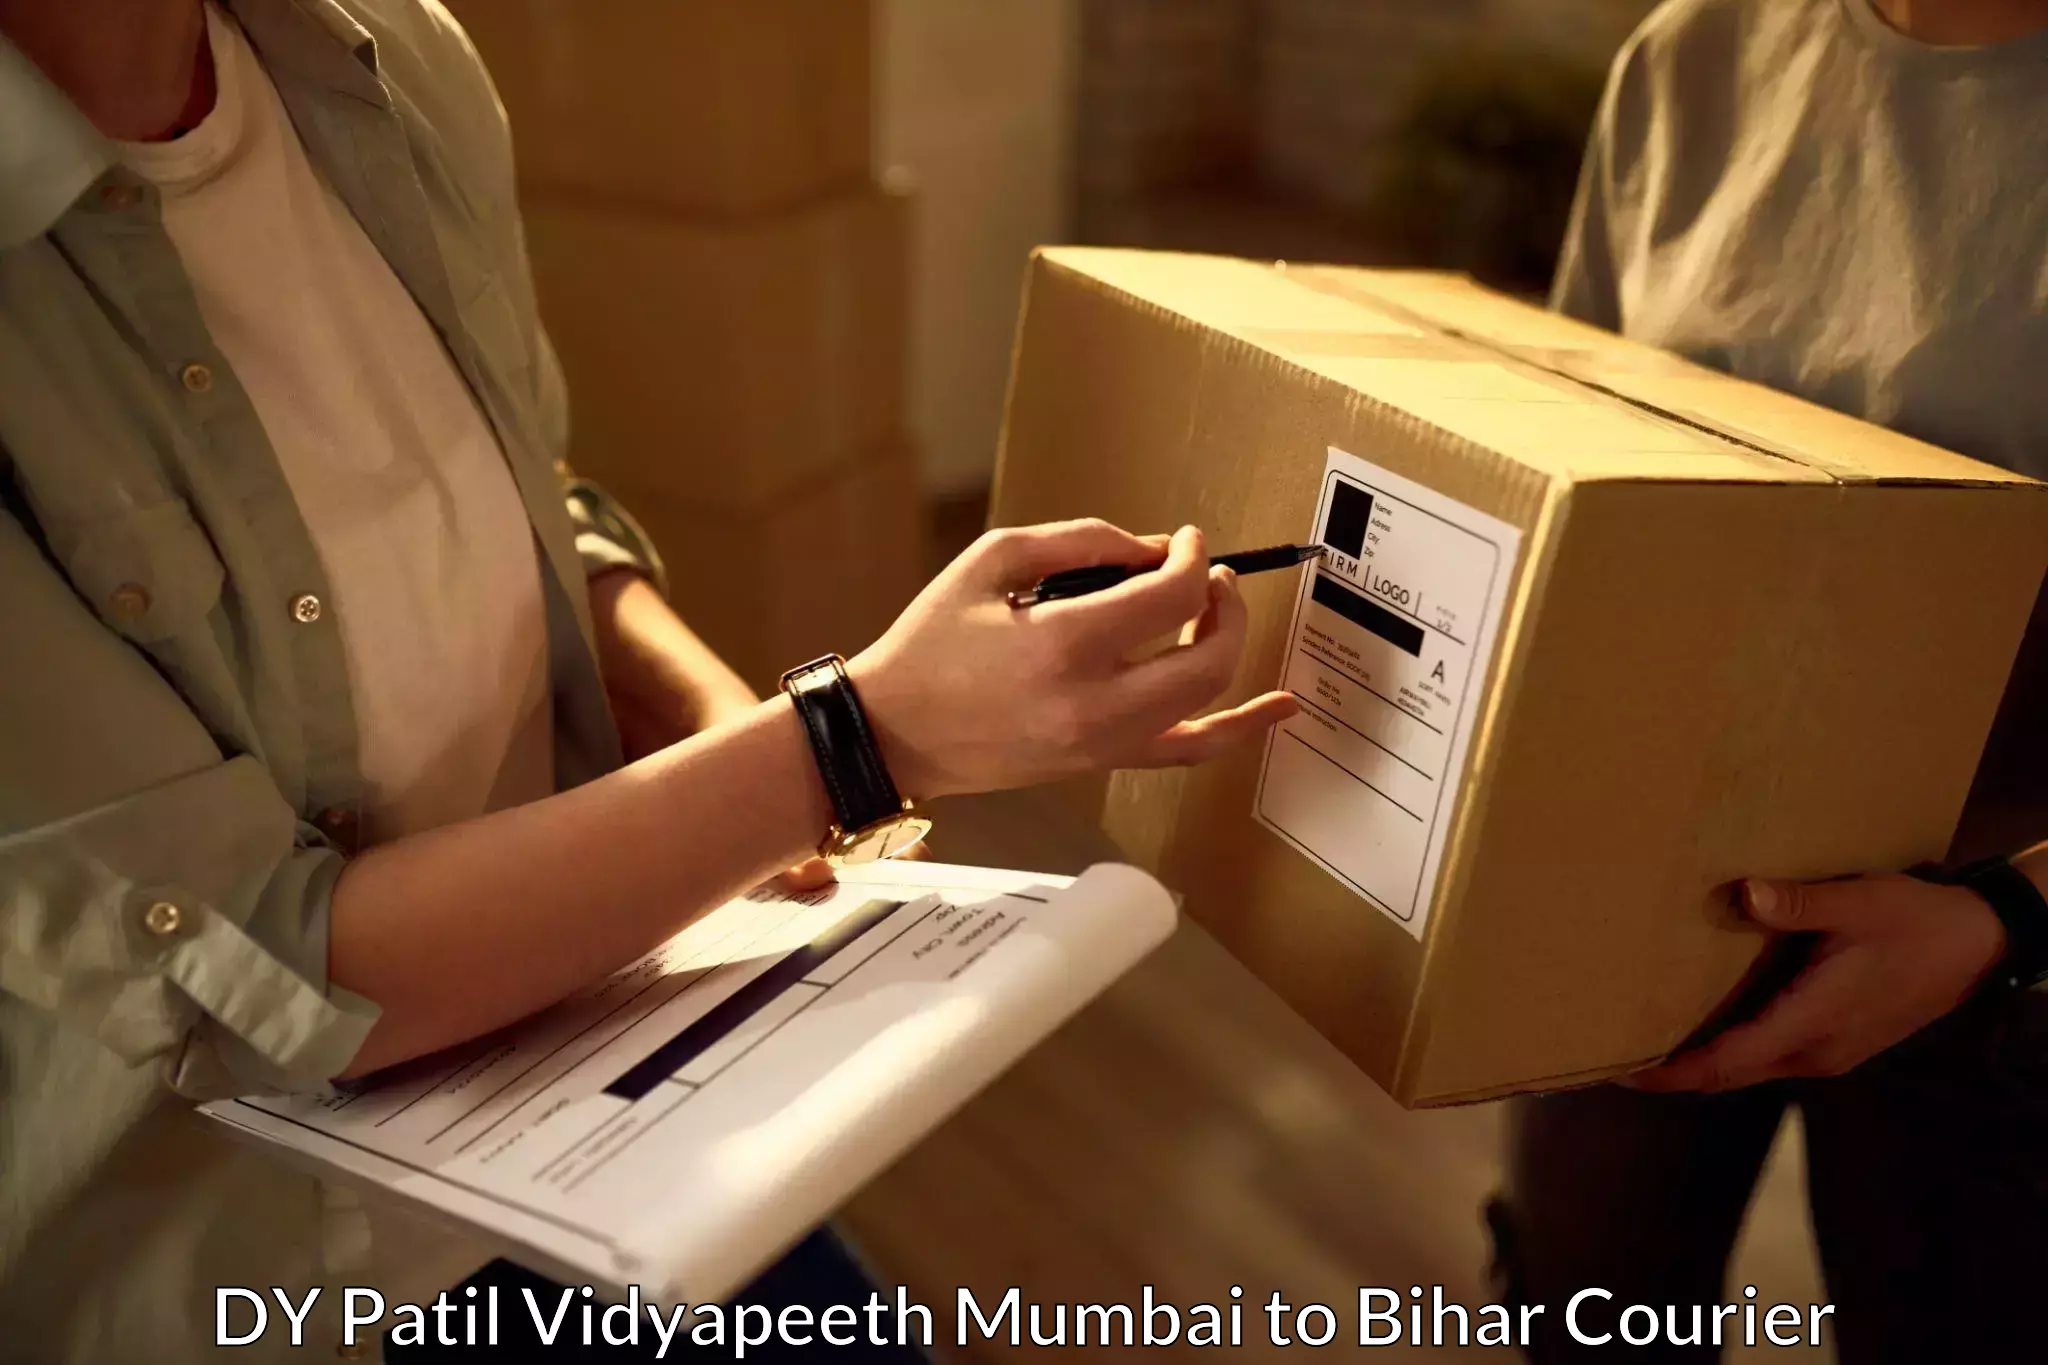 24-hour courier service in DY Patil Vidyapeeth Mumbai to Rajgir